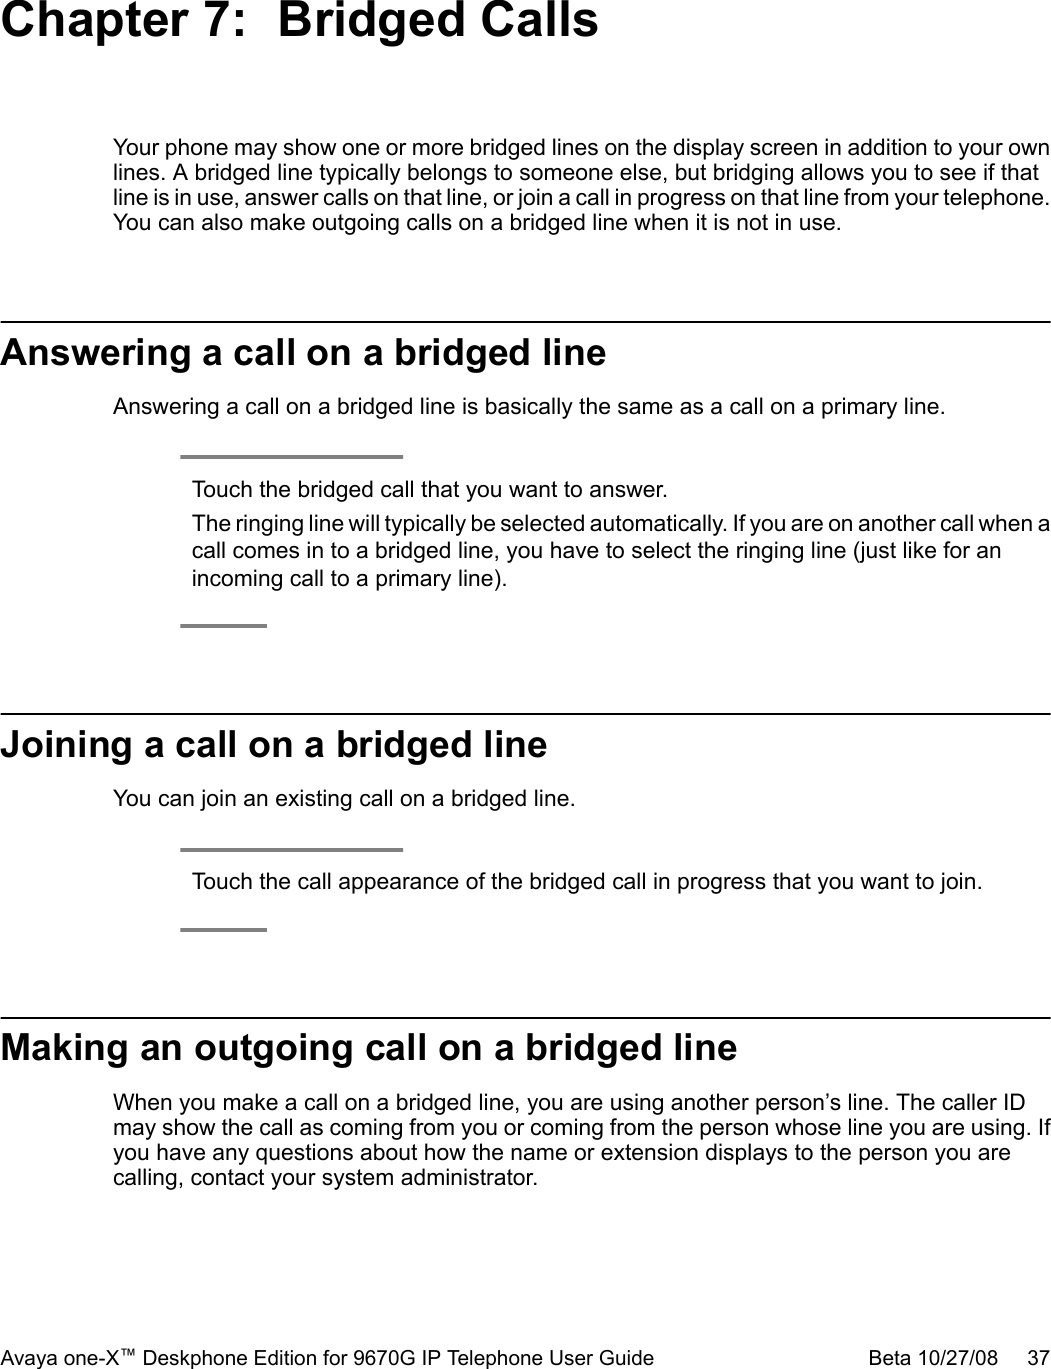 Chapter 7:  Bridged CallsYour phone may show one or more bridged lines on the display screen in addition to your ownlines. A bridged line typically belongs to someone else, but bridging allows you to see if thatline is in use, answer calls on that line, or join a call in progress on that line from your telephone.You can also make outgoing calls on a bridged line when it is not in use.Answering a call on a bridged lineAnswering a call on a bridged line is basically the same as a call on a primary line.Touch the bridged call that you want to answer.The ringing line will typically be selected automatically. If you are on another call when acall comes in to a bridged line, you have to select the ringing line (just like for anincoming call to a primary line).Joining a call on a bridged lineYou can join an existing call on a bridged line.Touch the call appearance of the bridged call in progress that you want to join.Making an outgoing call on a bridged lineWhen you make a call on a bridged line, you are using another person’s line. The caller IDmay show the call as coming from you or coming from the person whose line you are using. Ifyou have any questions about how the name or extension displays to the person you arecalling, contact your system administrator.Avaya one-X™ Deskphone Edition for 9670G IP Telephone User Guide Beta 10/27/08     37